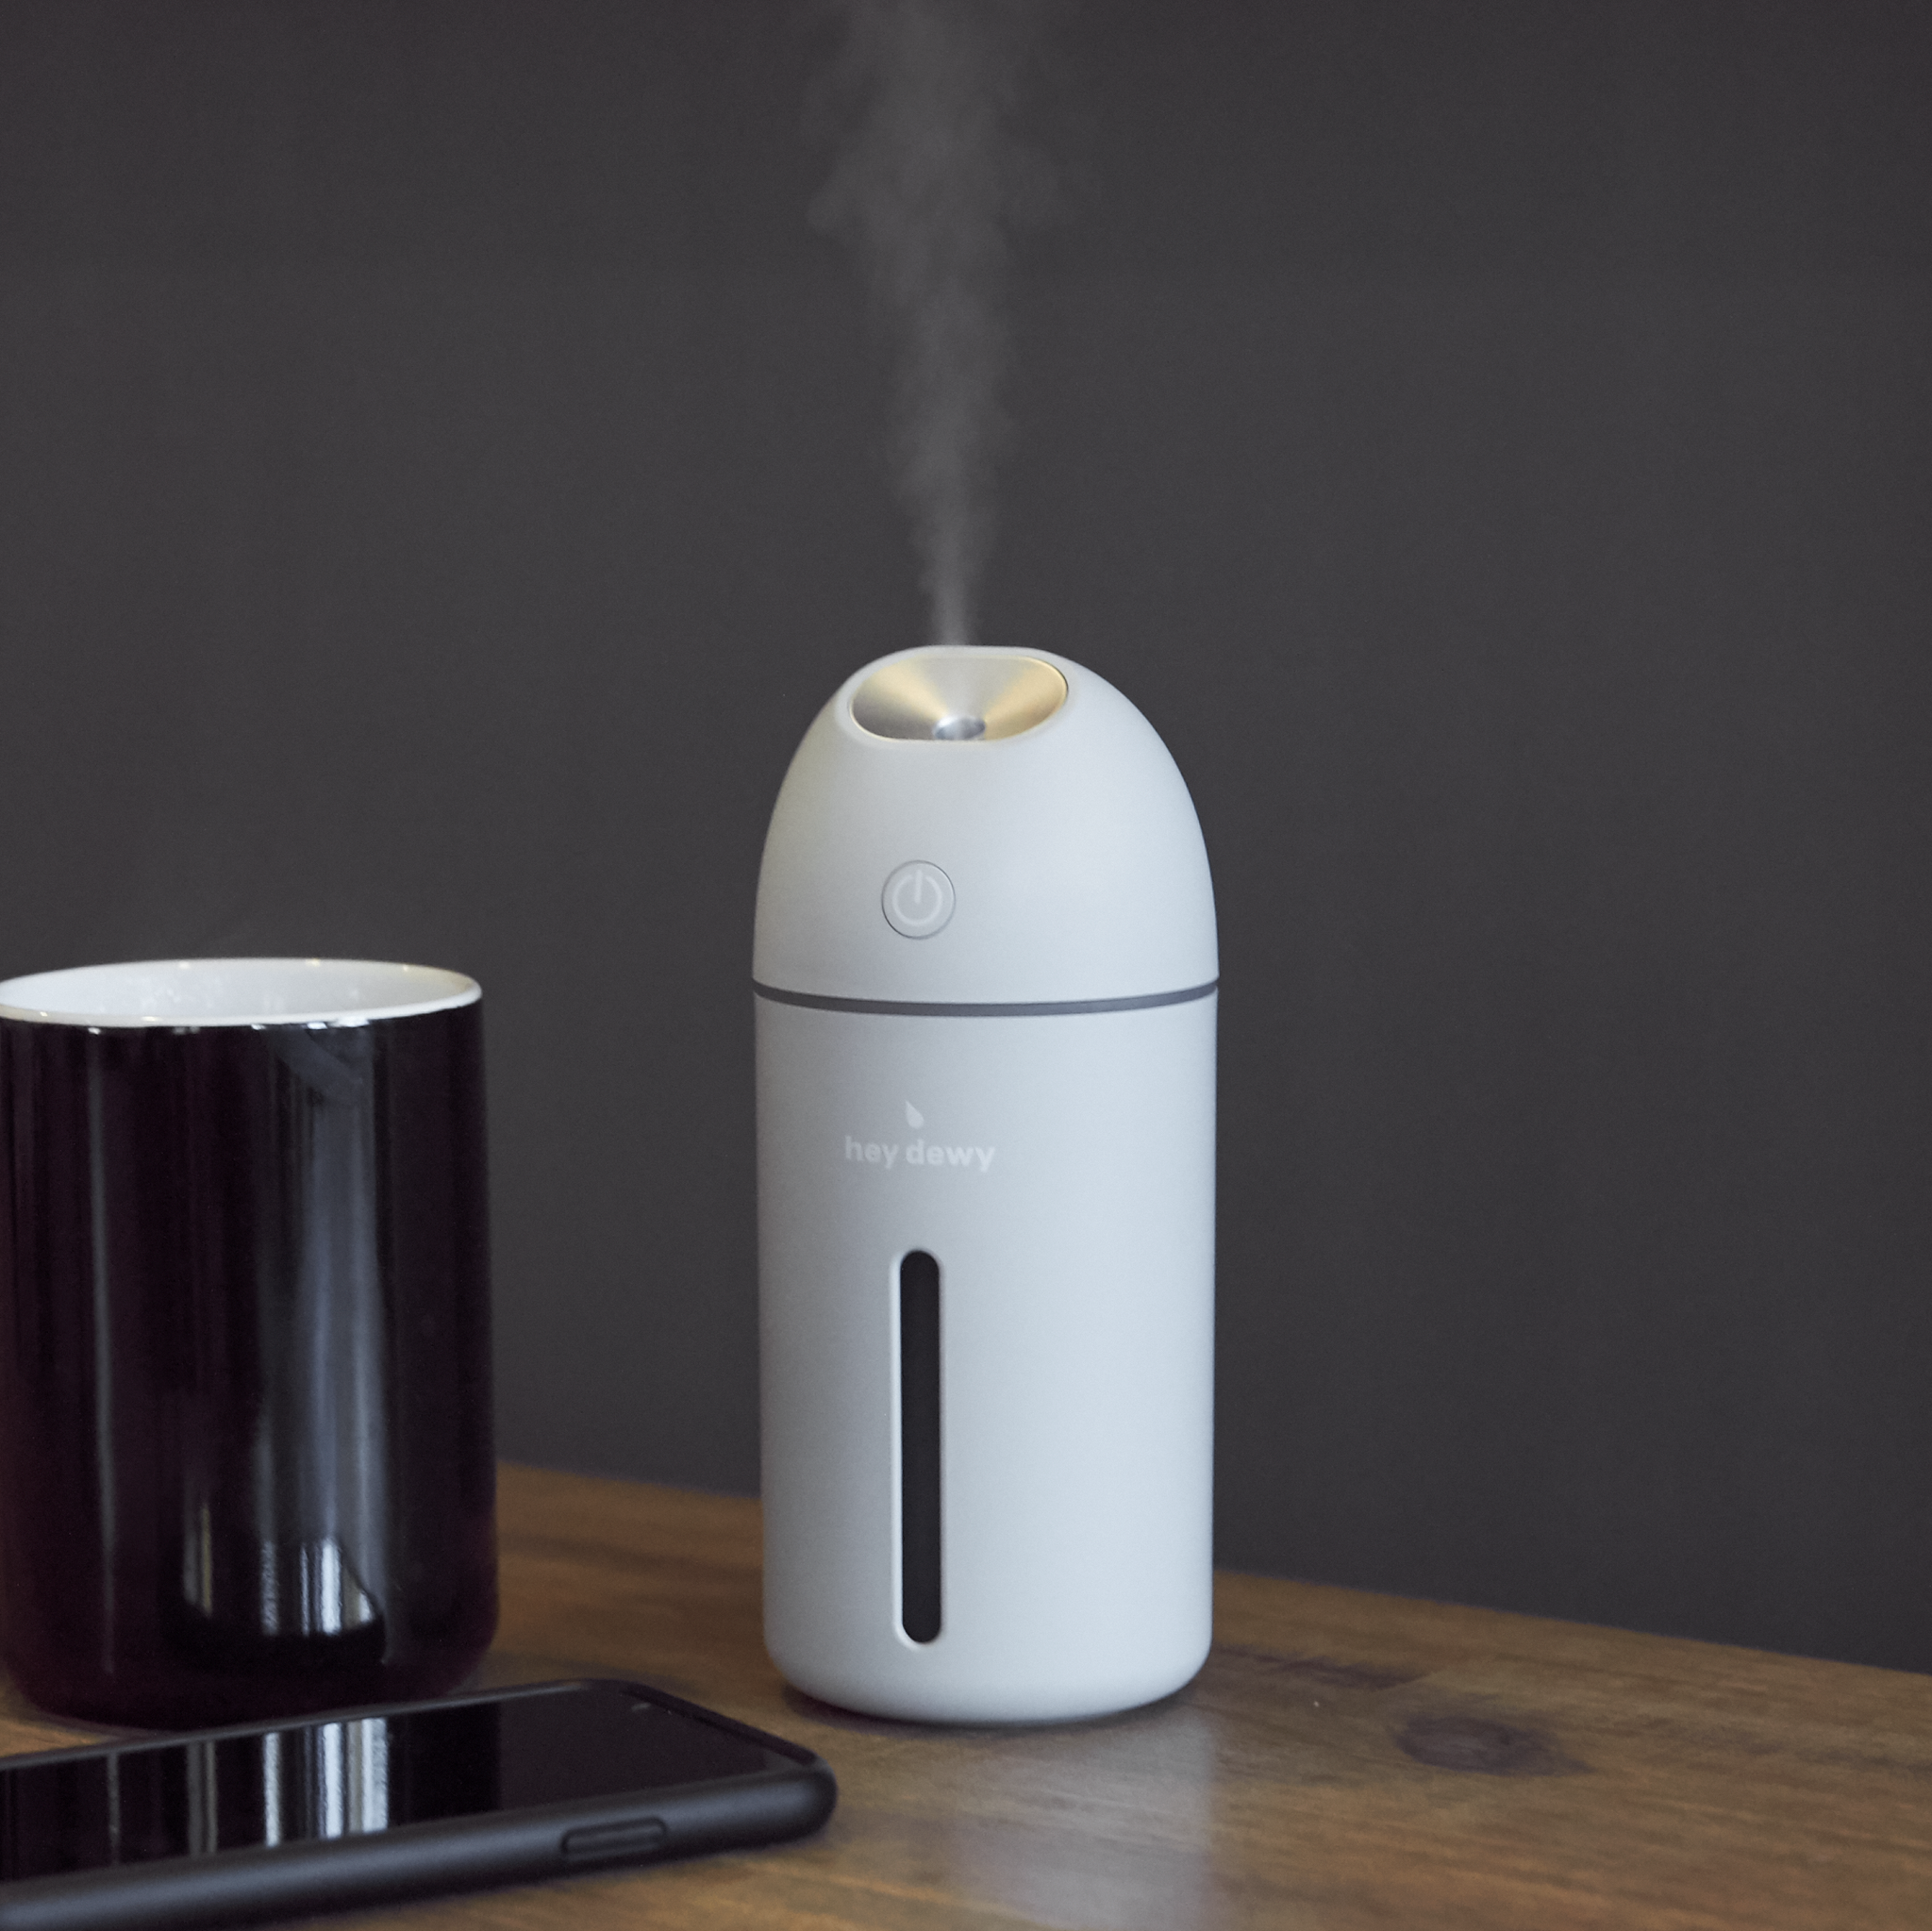 The Hey Dewy Humidifier Improves My Dry Skin and Allergies on the Road